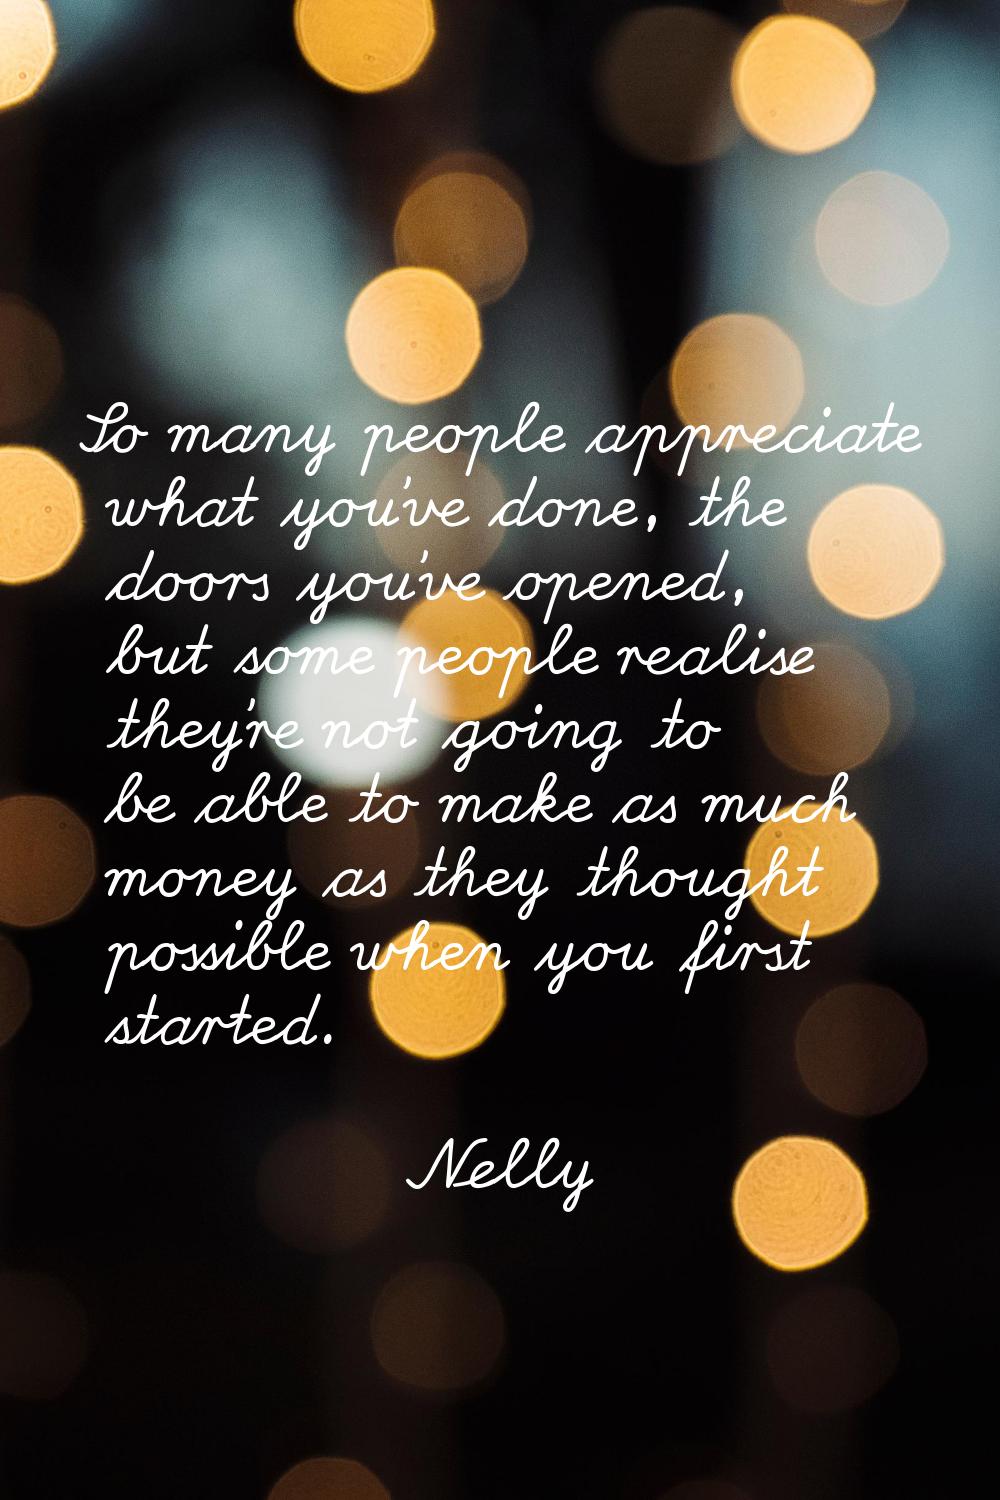 So many people appreciate what you've done, the doors you've opened, but some people realise they'r